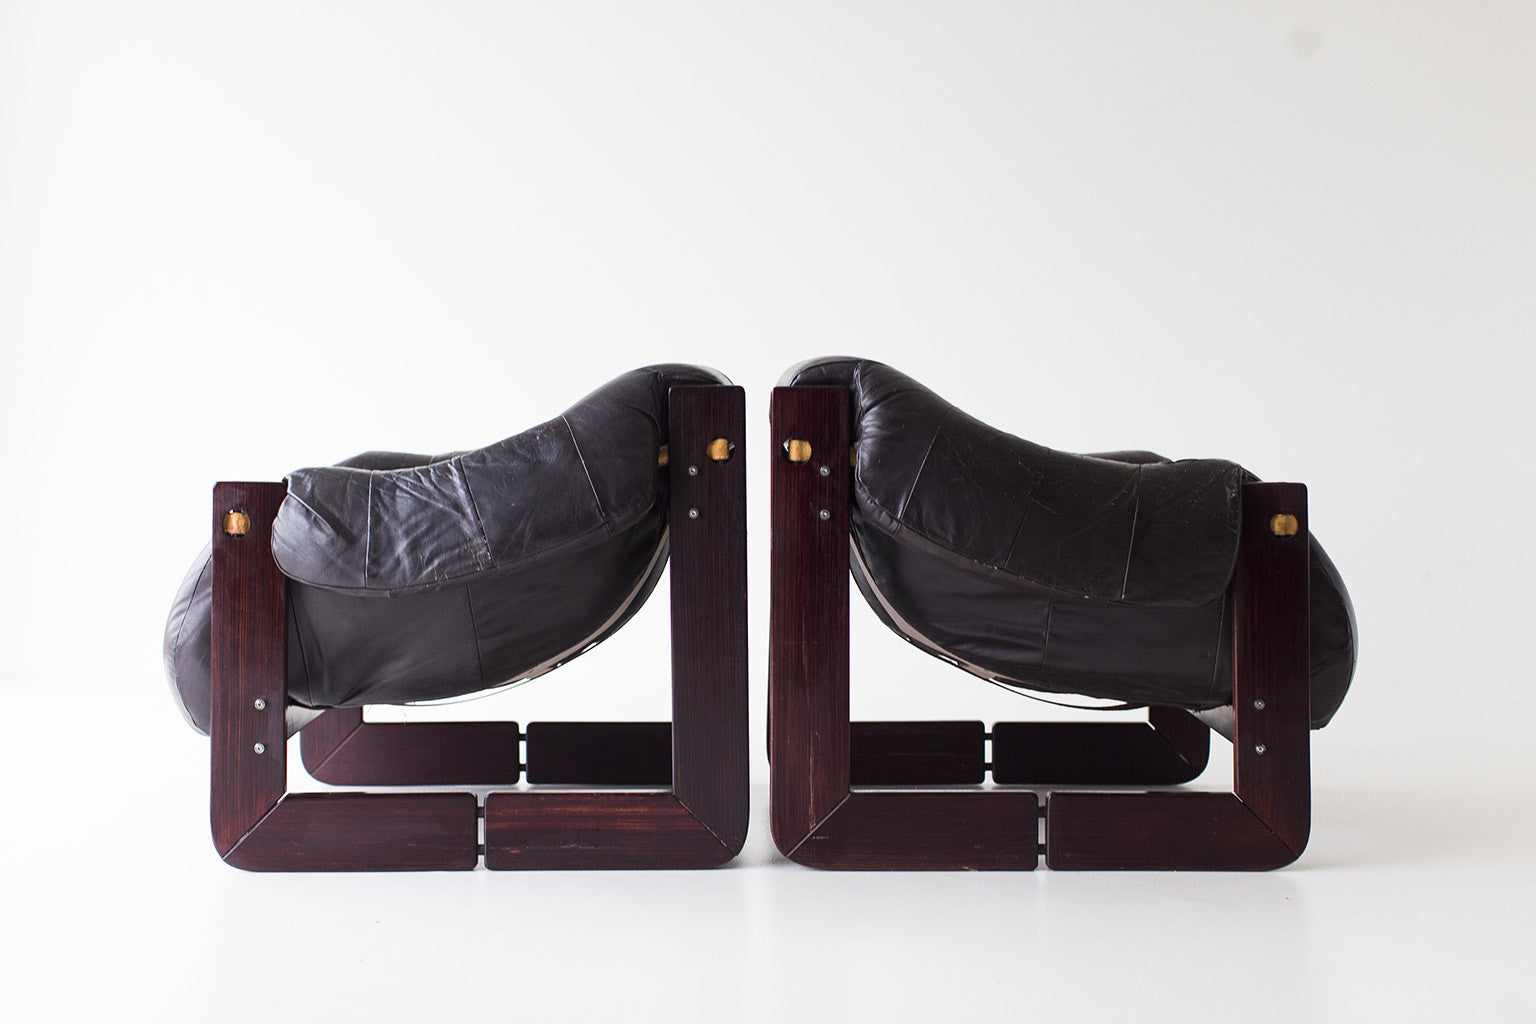 Percival Lafer Leather Lounge Chairs - 01141616